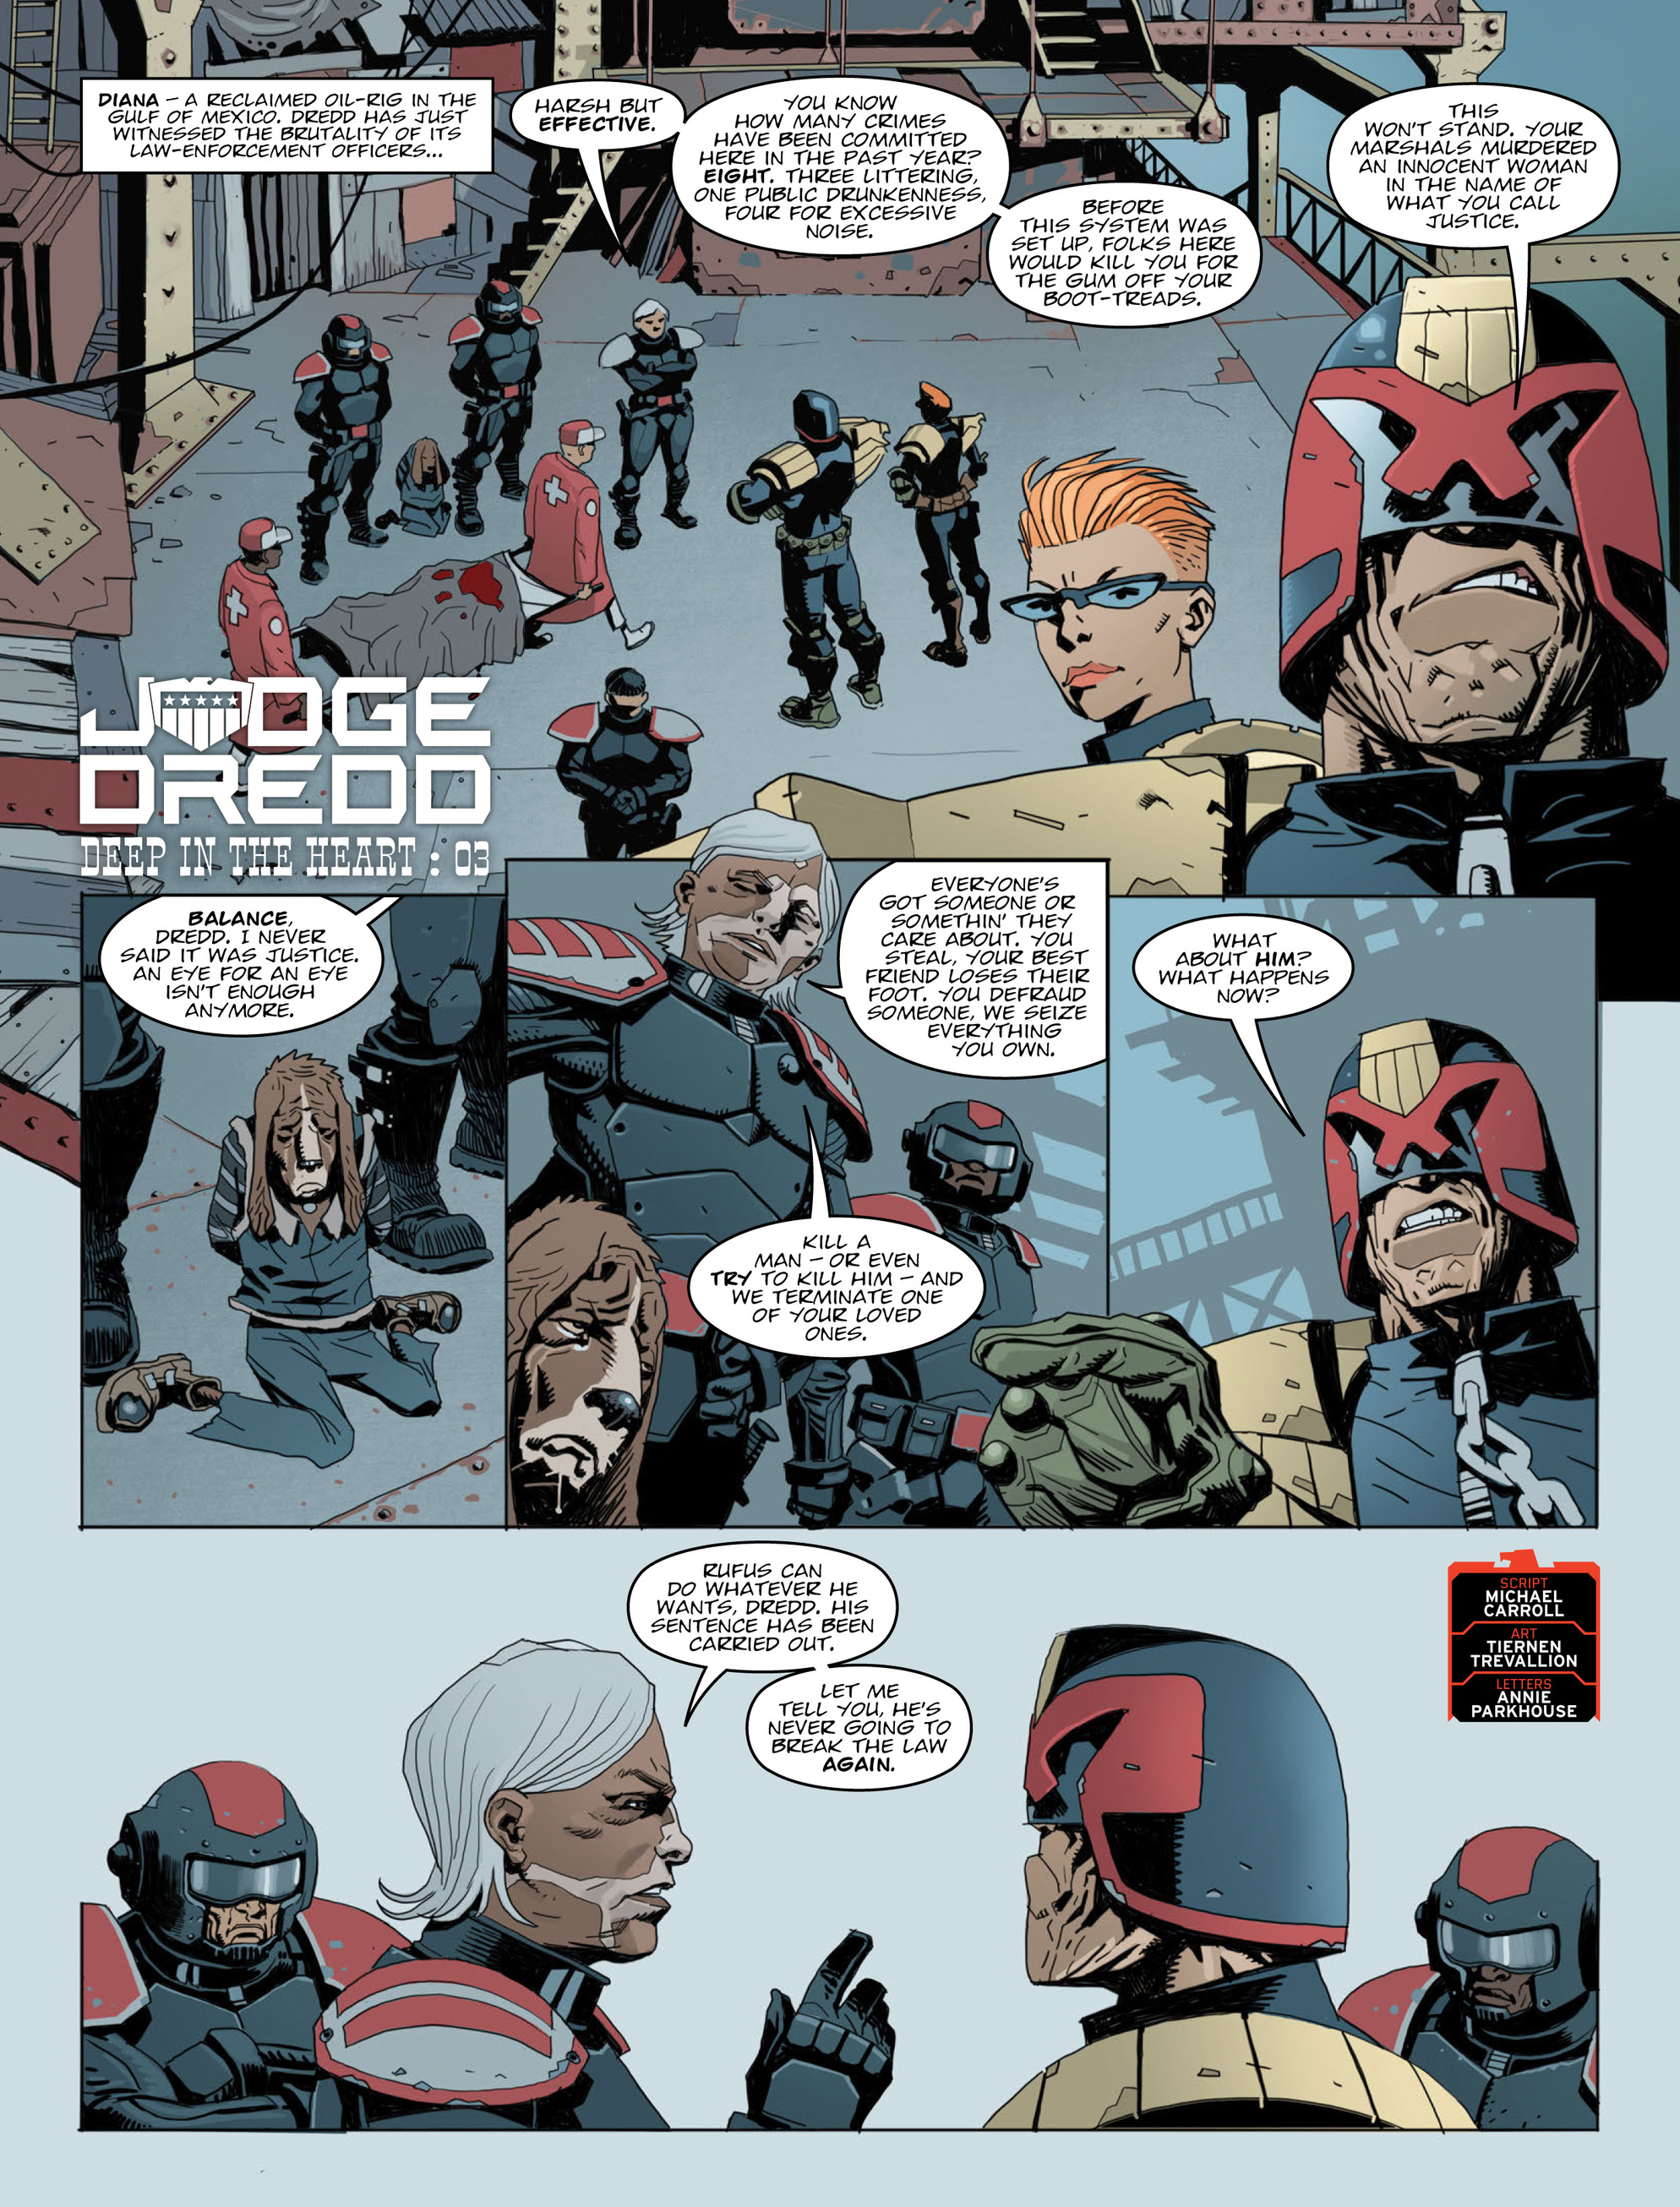 2000 AD: Chapter 2014 - Page 3